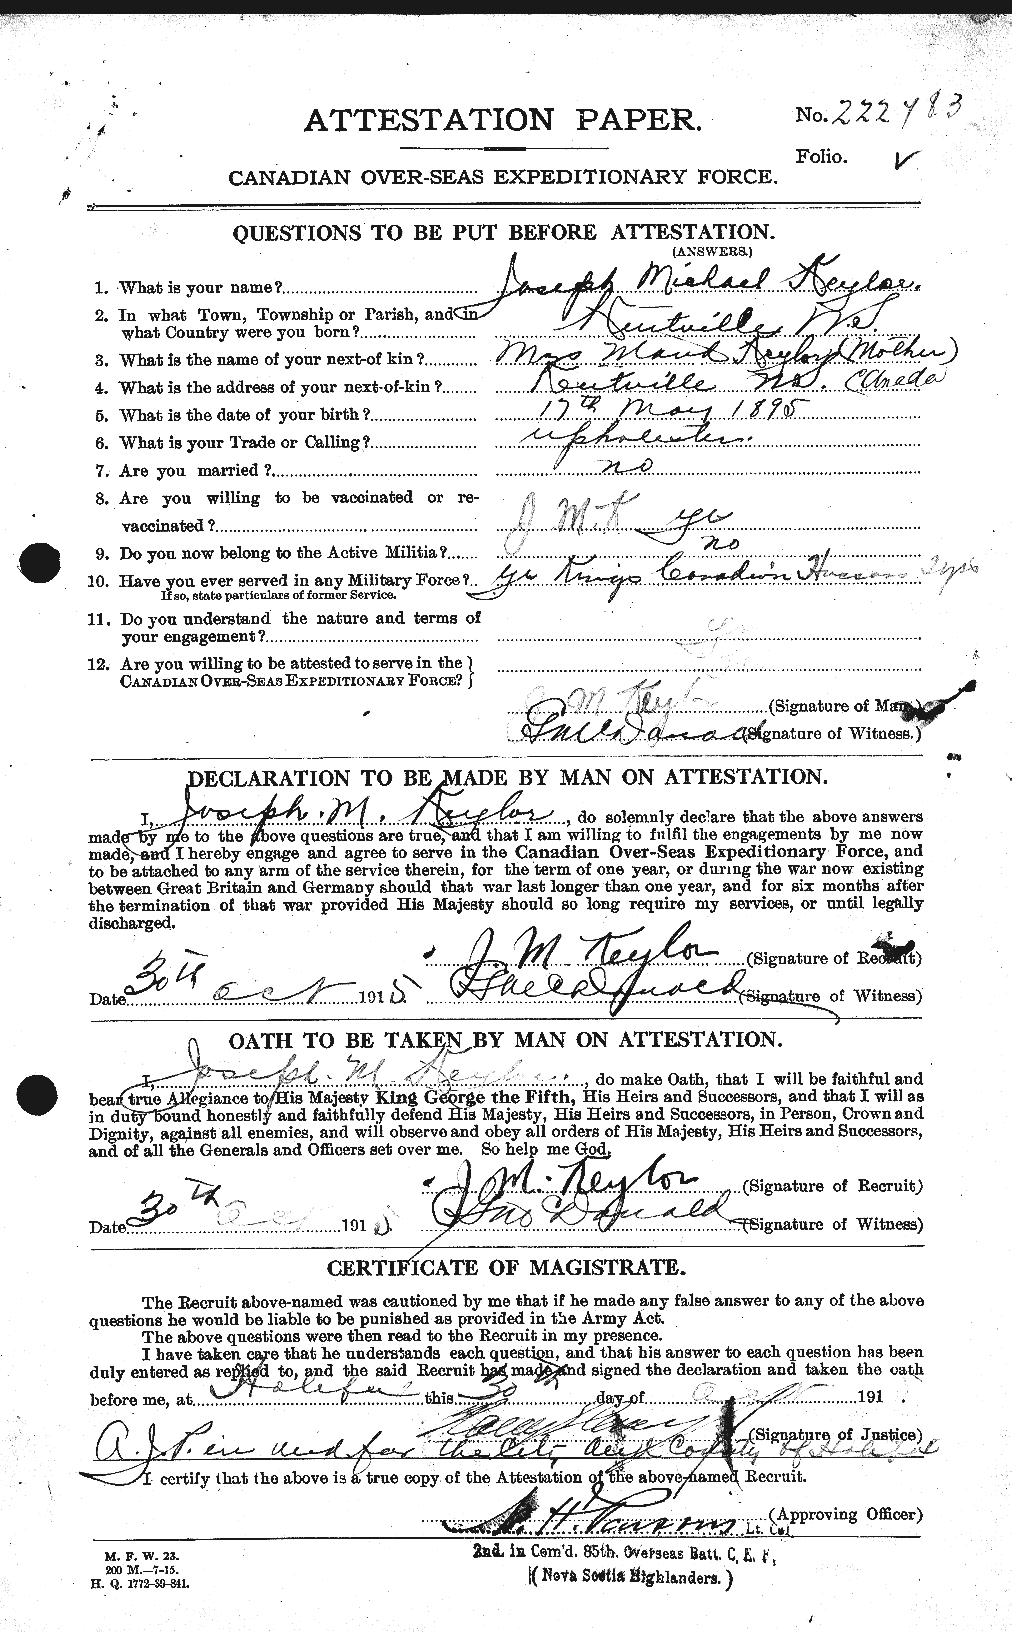 Personnel Records of the First World War - CEF 436537a